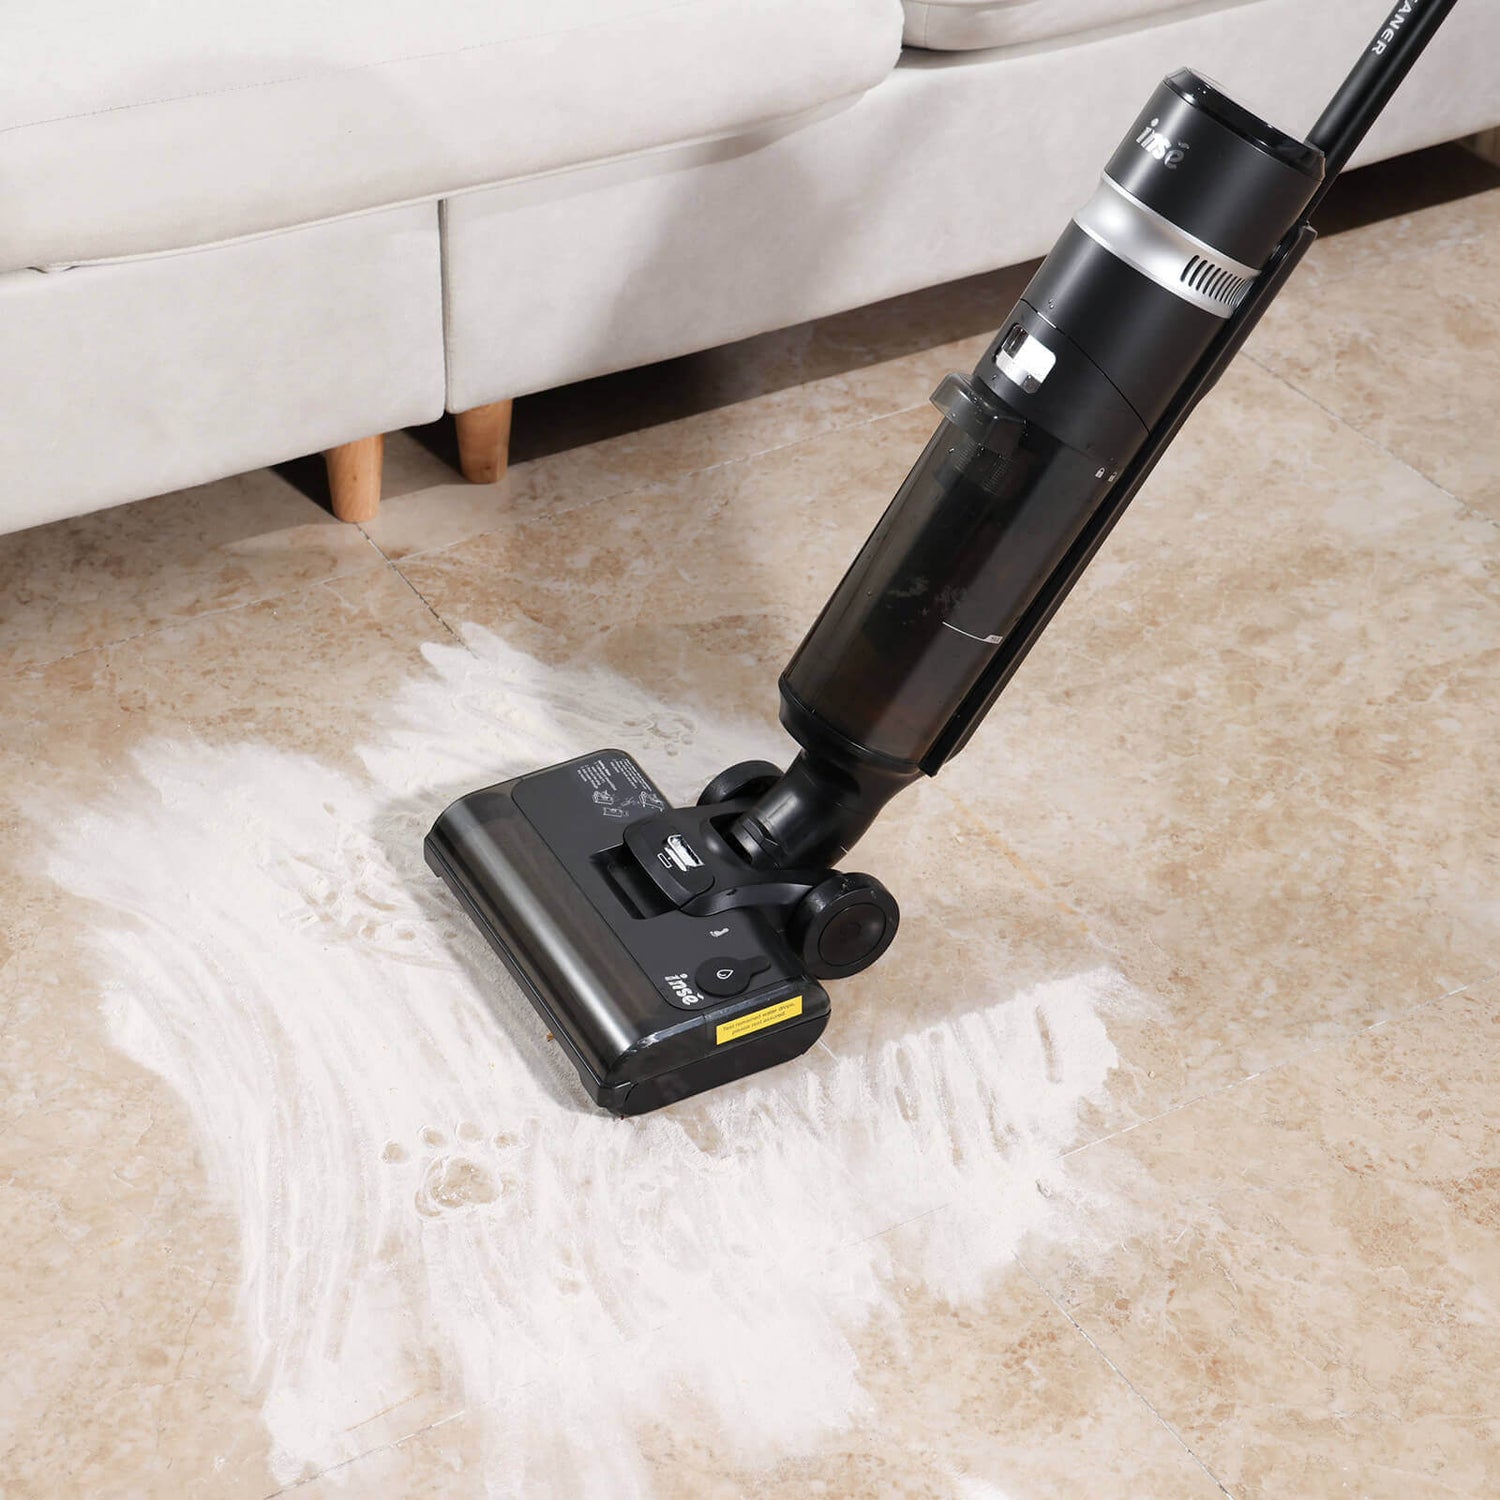 Cordless Rechargeable Mopping Floor Cleaner Wet Electric Vacuum